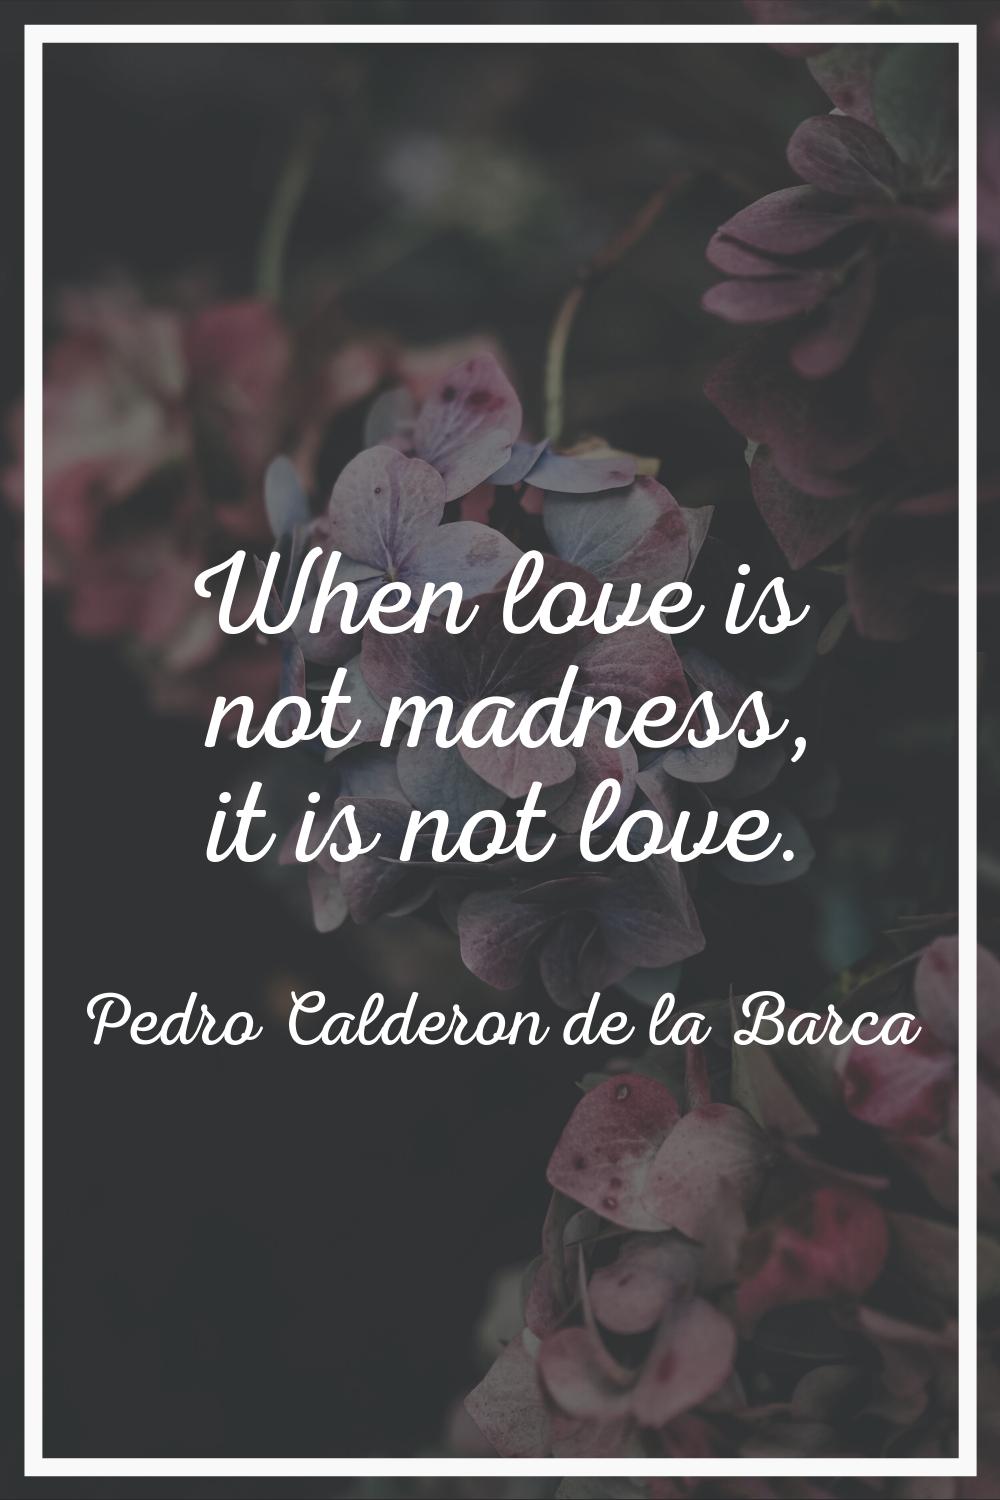 When love is not madness, it is not love.